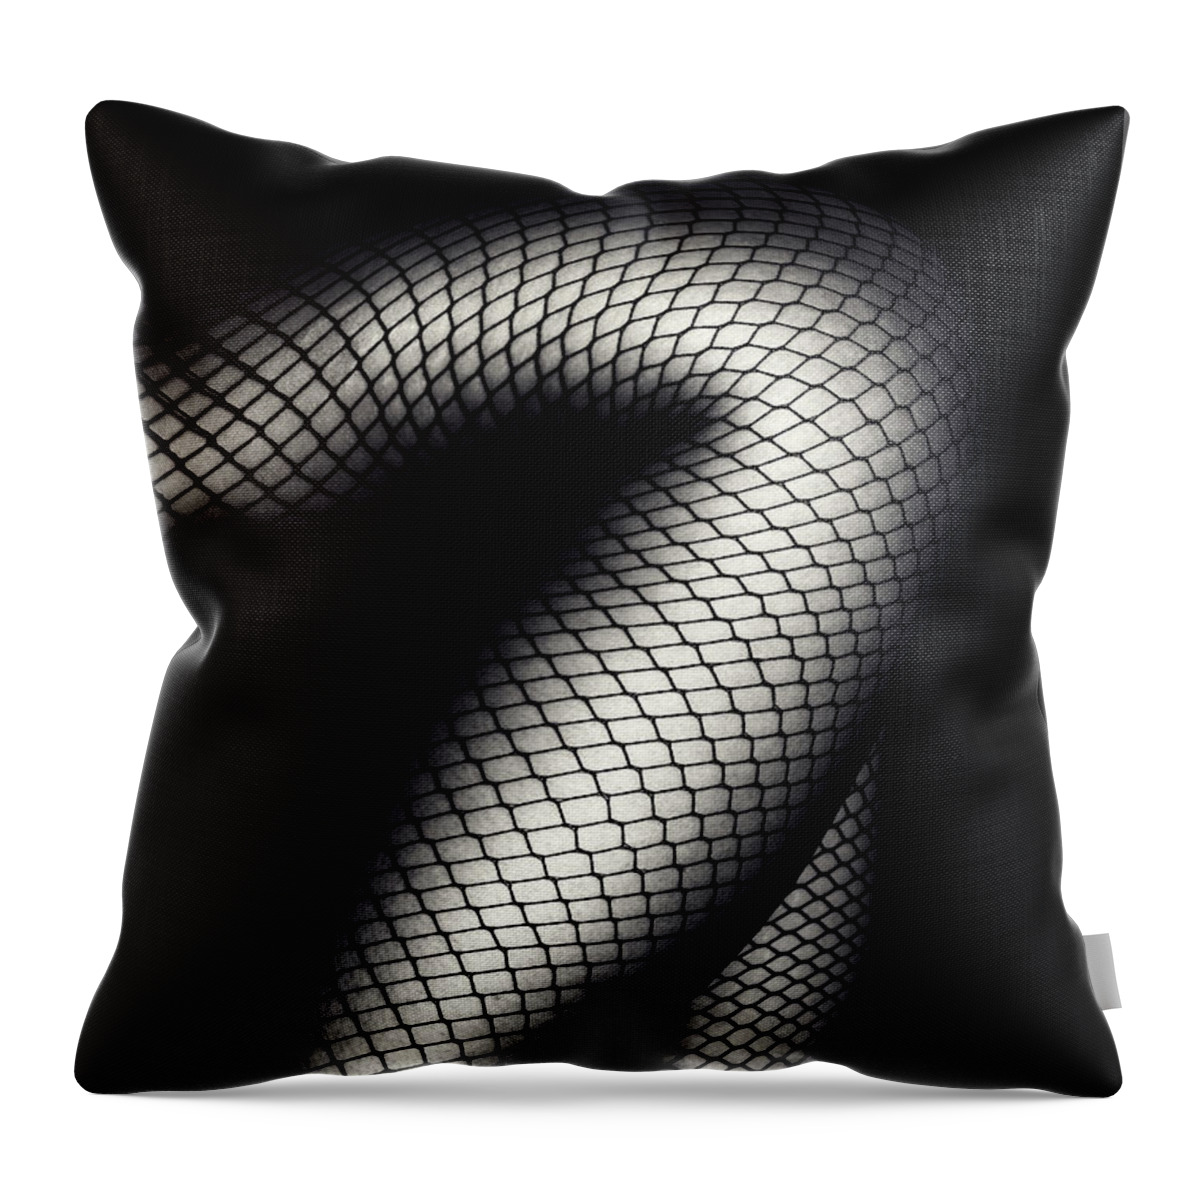 Woman Throw Pillow featuring the photograph Legs in Fishnet Stockings 2 by Johan Swanepoel